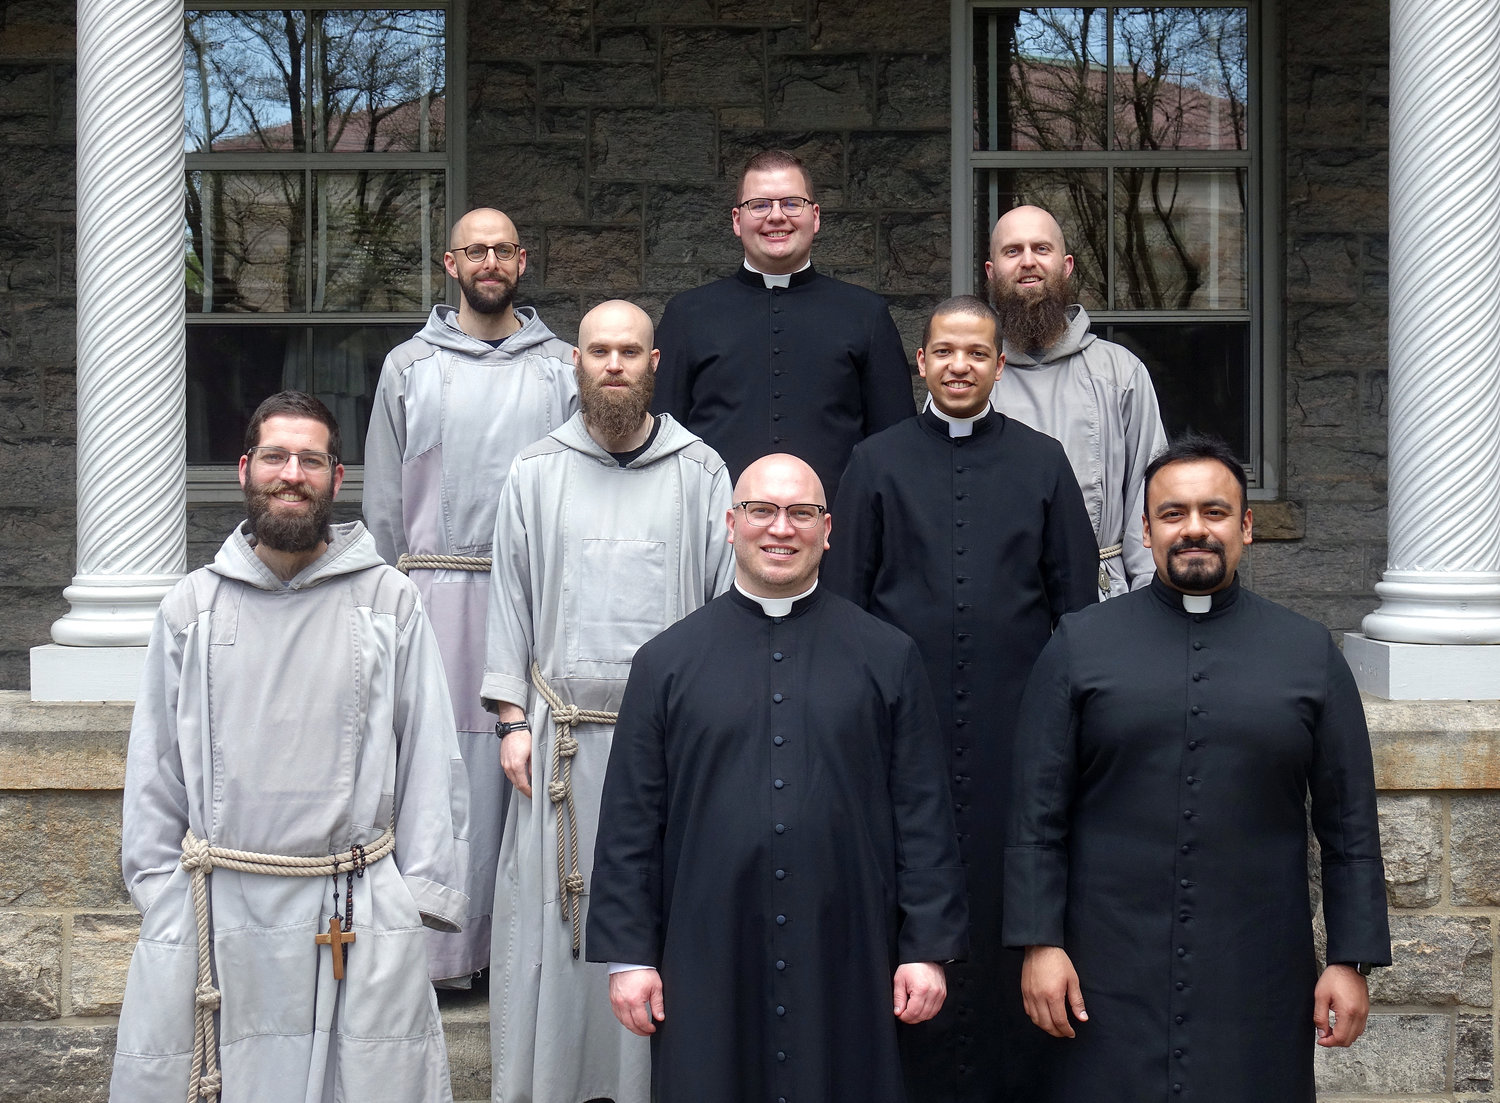 Eight members of the Class of 2021 at St. Joseph’s Seminary pose on the Dunwoodie campus. From left, they are Father Frantisek Marie Chloupek, C.F.R., Father Ignatius Pio Mariae Doherty, C.F.R., Father Joseph Michael Fino, C.F.R., Father Robert Carolan, Father Kevin Panameño , Father Elijah Marie Perri, C.F.R., Father Steven N. Gonzalez and Father Matthew Breslin. All eight, plus Father Carmine Caruso and Father Wesbee Victor, will be ordained to the priesthood by Cardinal Dolan at St. Patrick’s Cathedral Saturday, May 29.